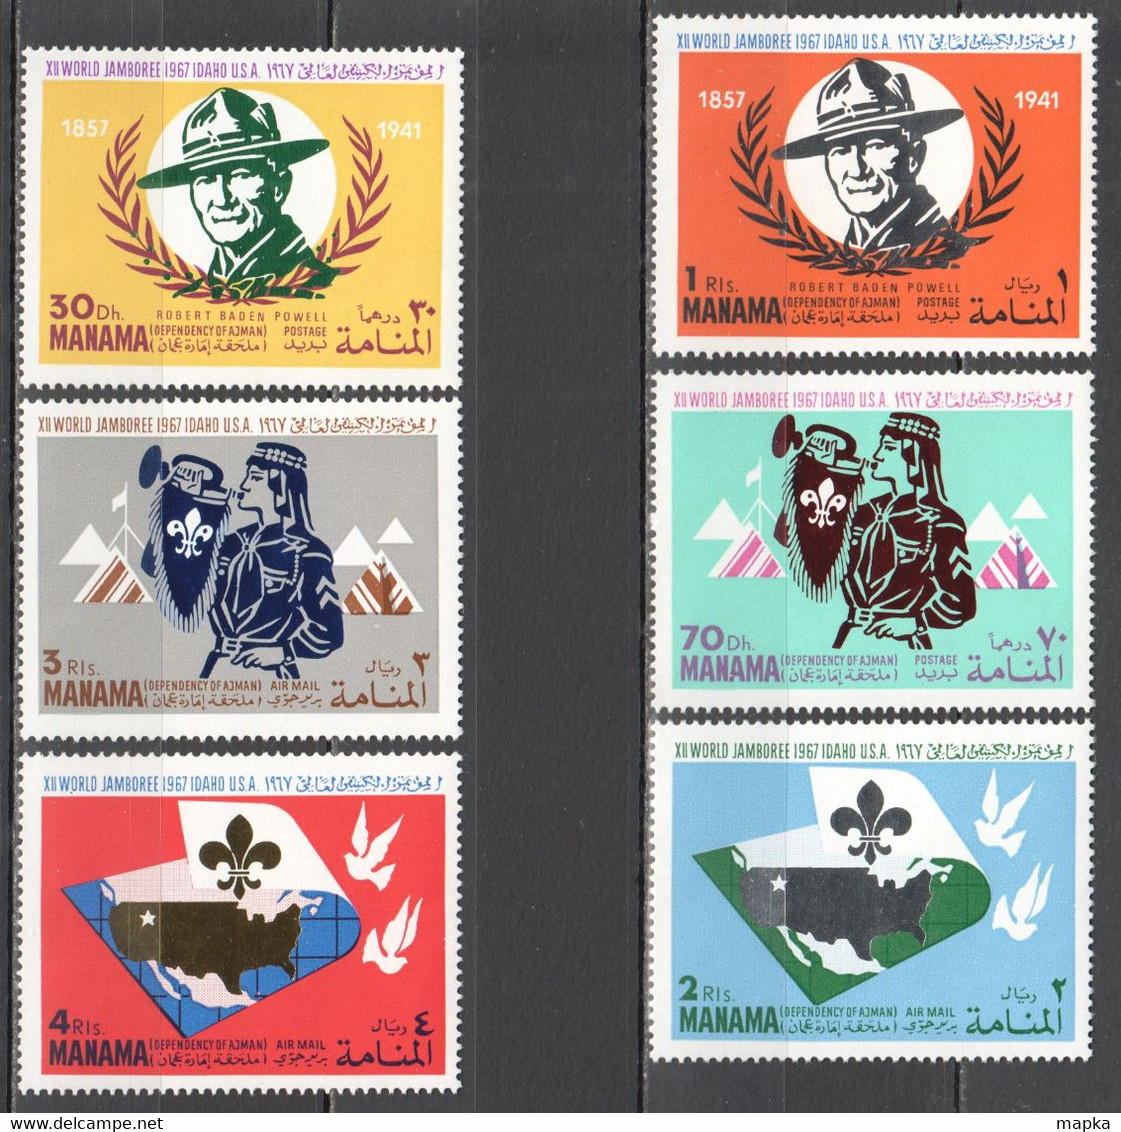 AR042 1967 MANAMA AIR MAIL REFLECTIVE FOIL OVERPRINT 12TH WORLD JAMBOREE SCOUTING MICHEL #31A-36A 1SET MNH - Unused Stamps